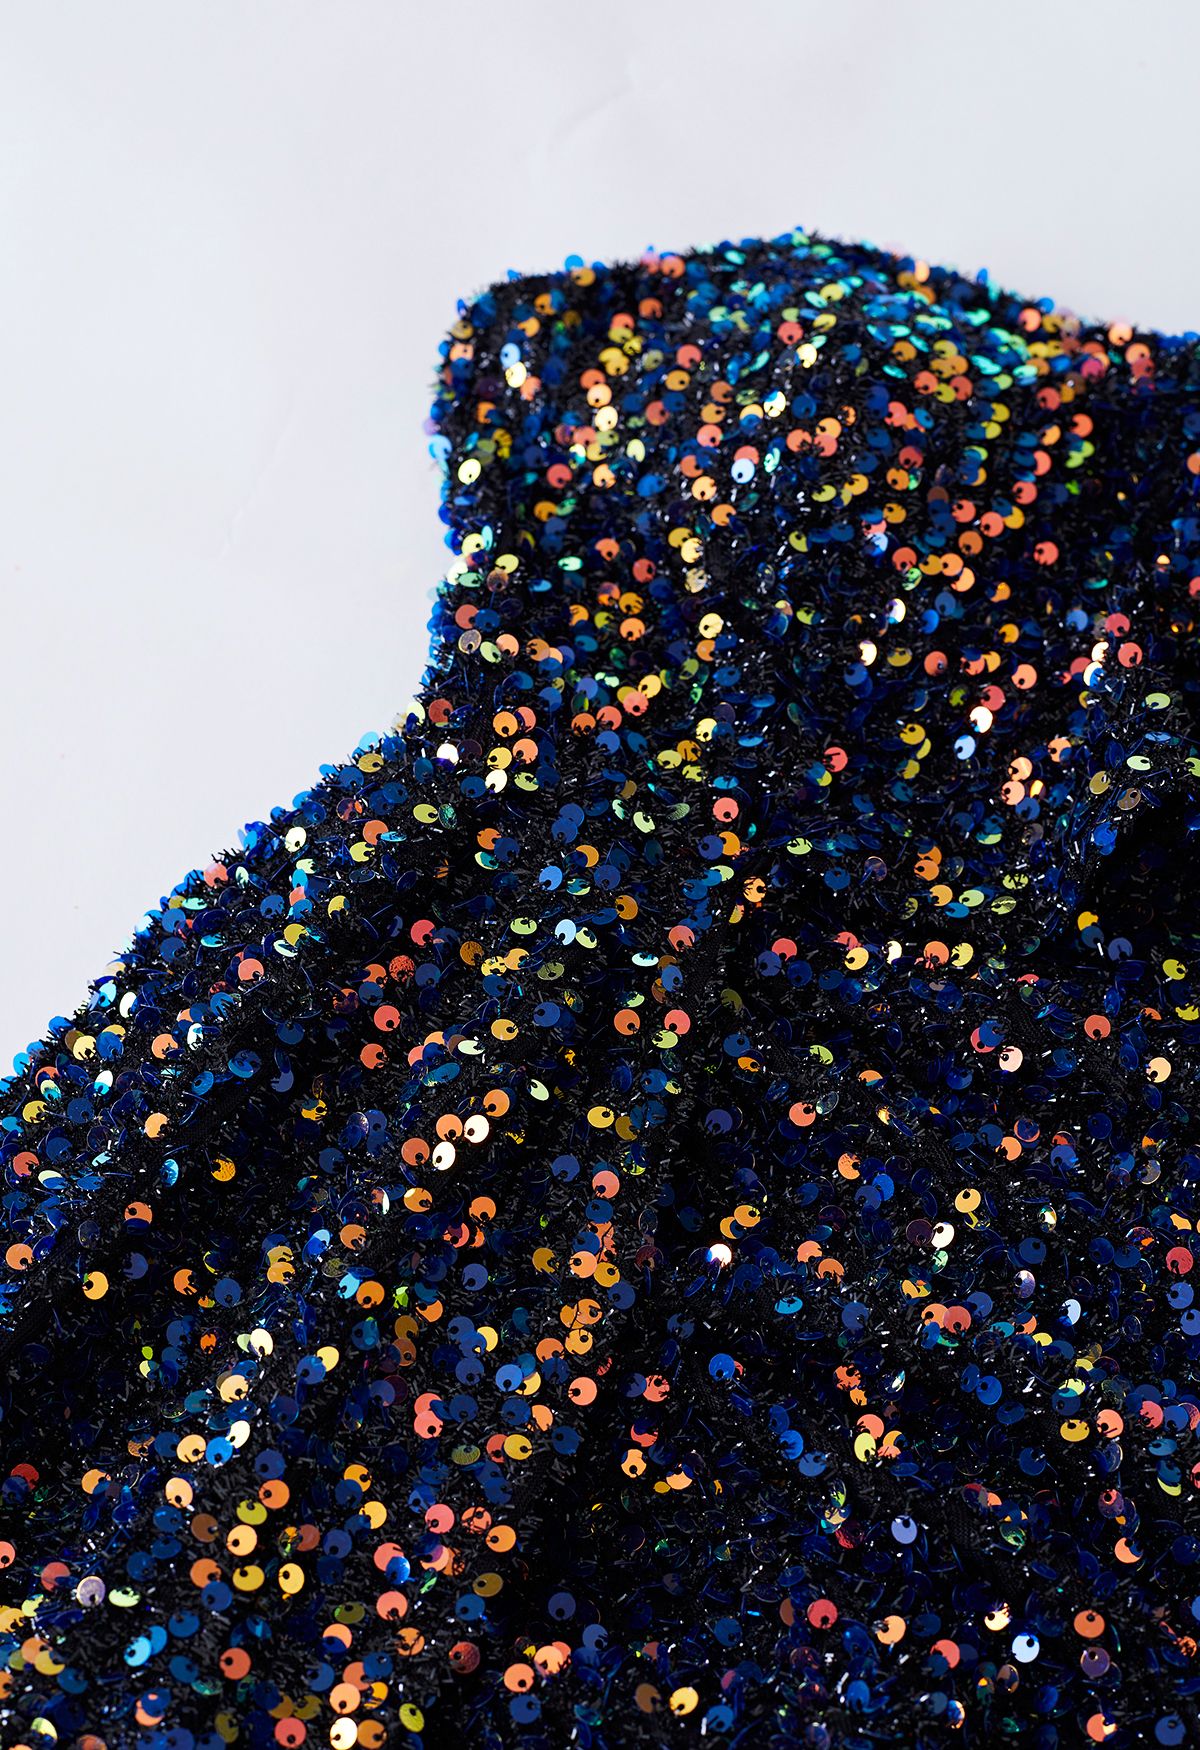 Ruffle One-Shoulder Colorful Sequin Cocktail Dress in Black